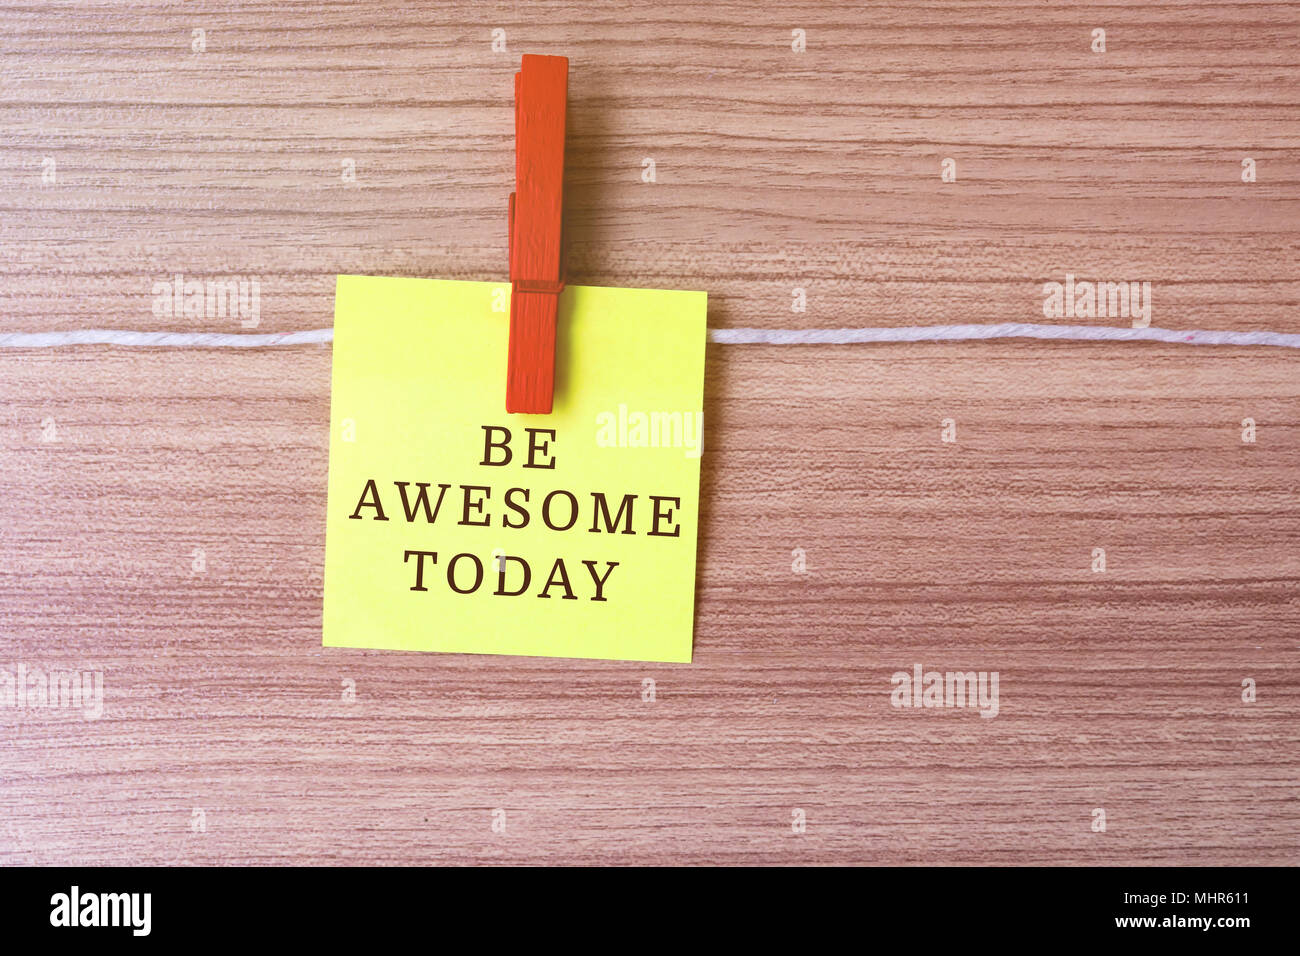 Inspirational quote - Be more awesome today on paper hanging by clothespins Stock Photo